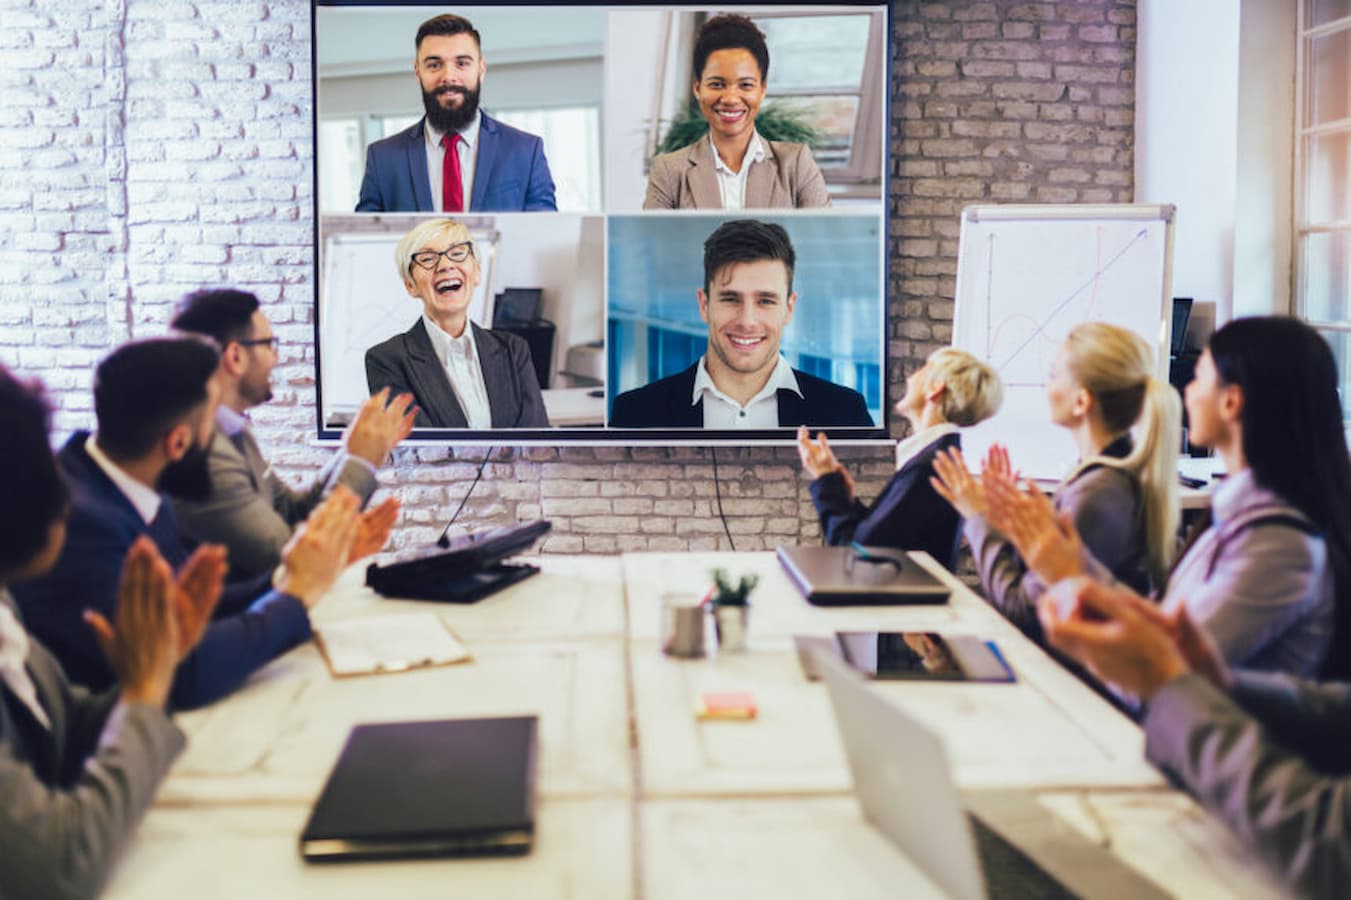 Business people looking at a screen during a video conference in the conference room